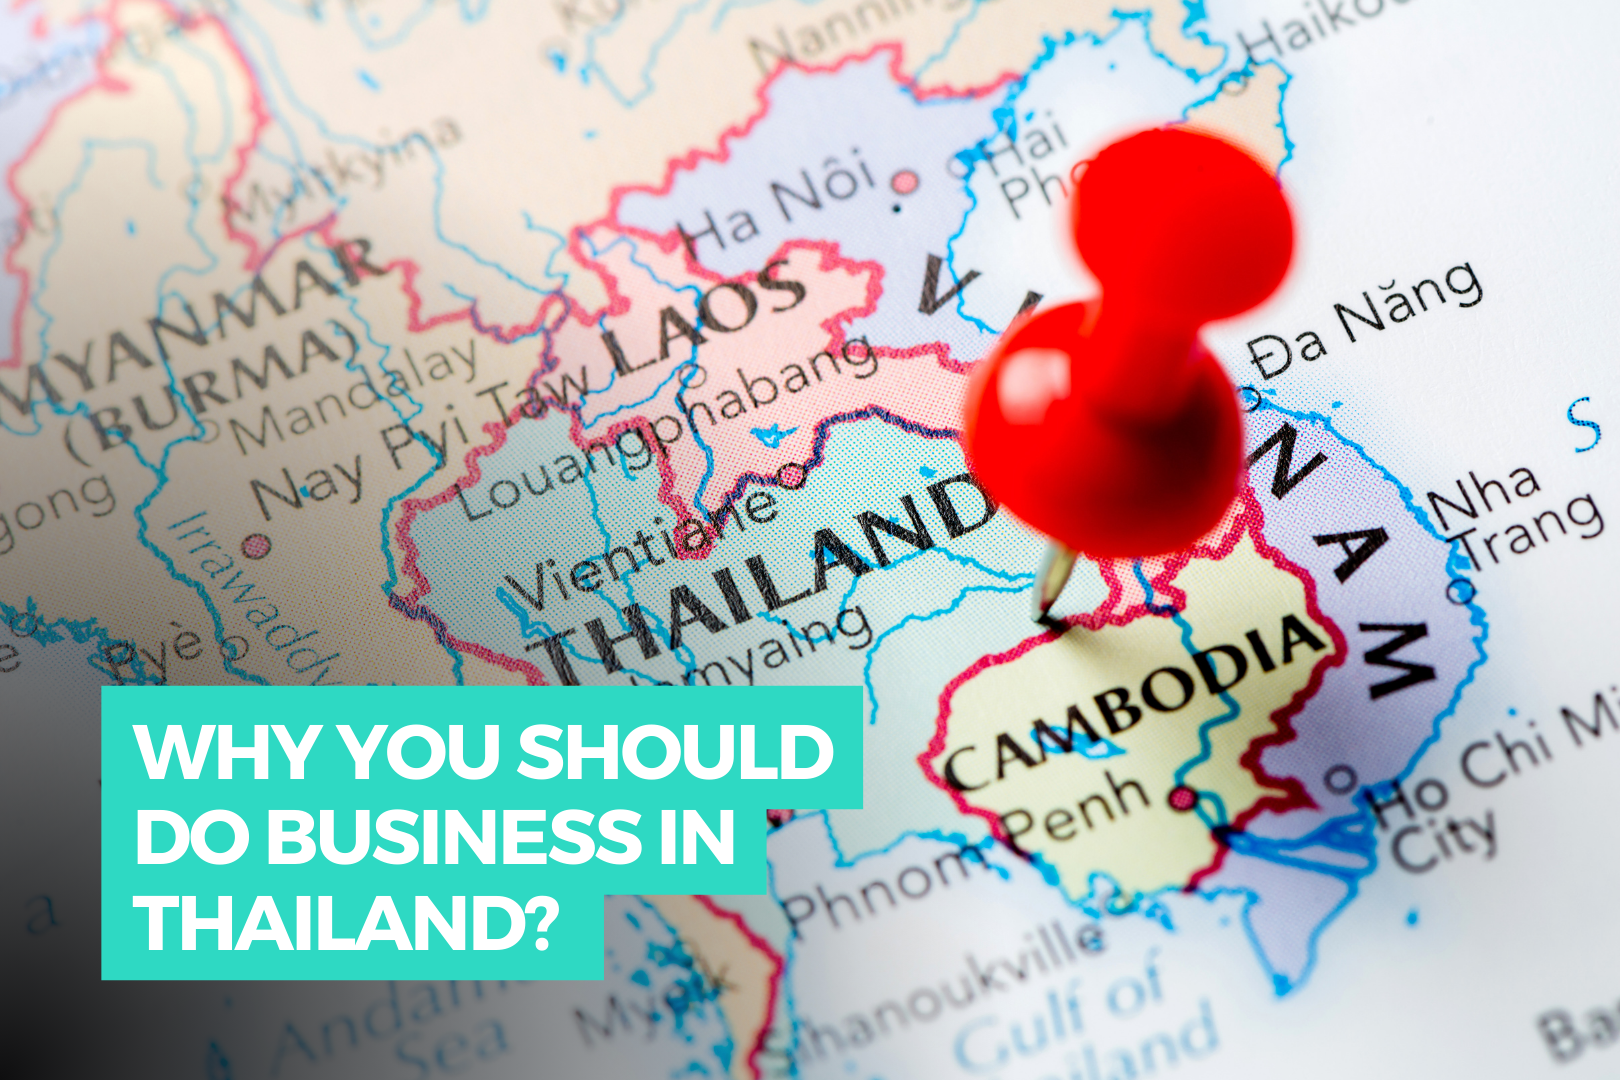 Why you should do business in Thailand?